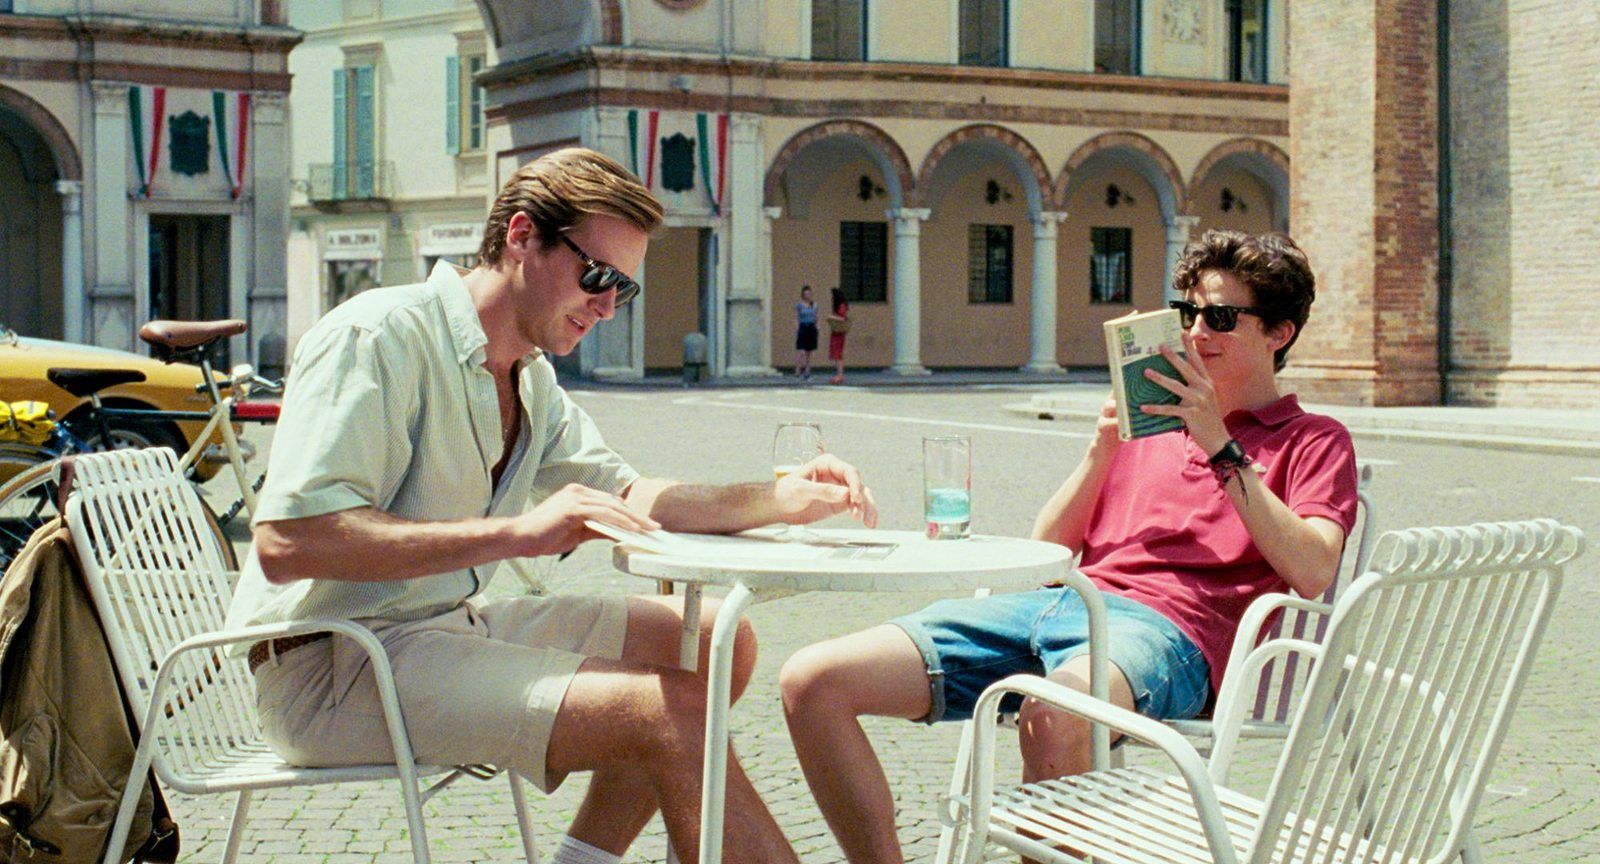 #4 Call Me by Your Name - The Poetic Italy